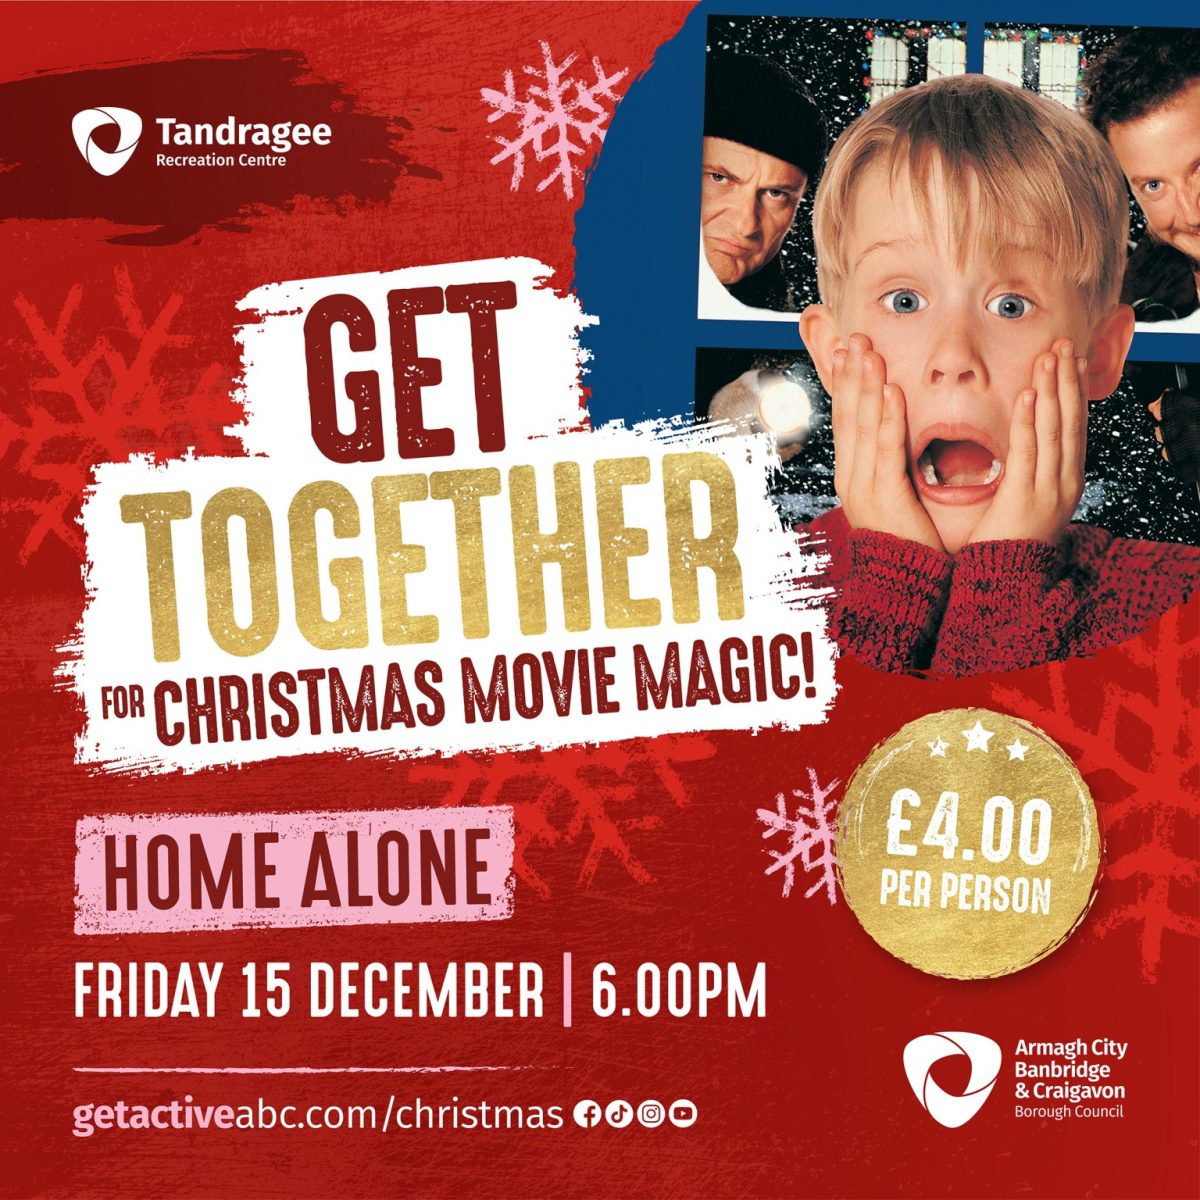 Christmas movie magic at the Tandragee Recreation Centre